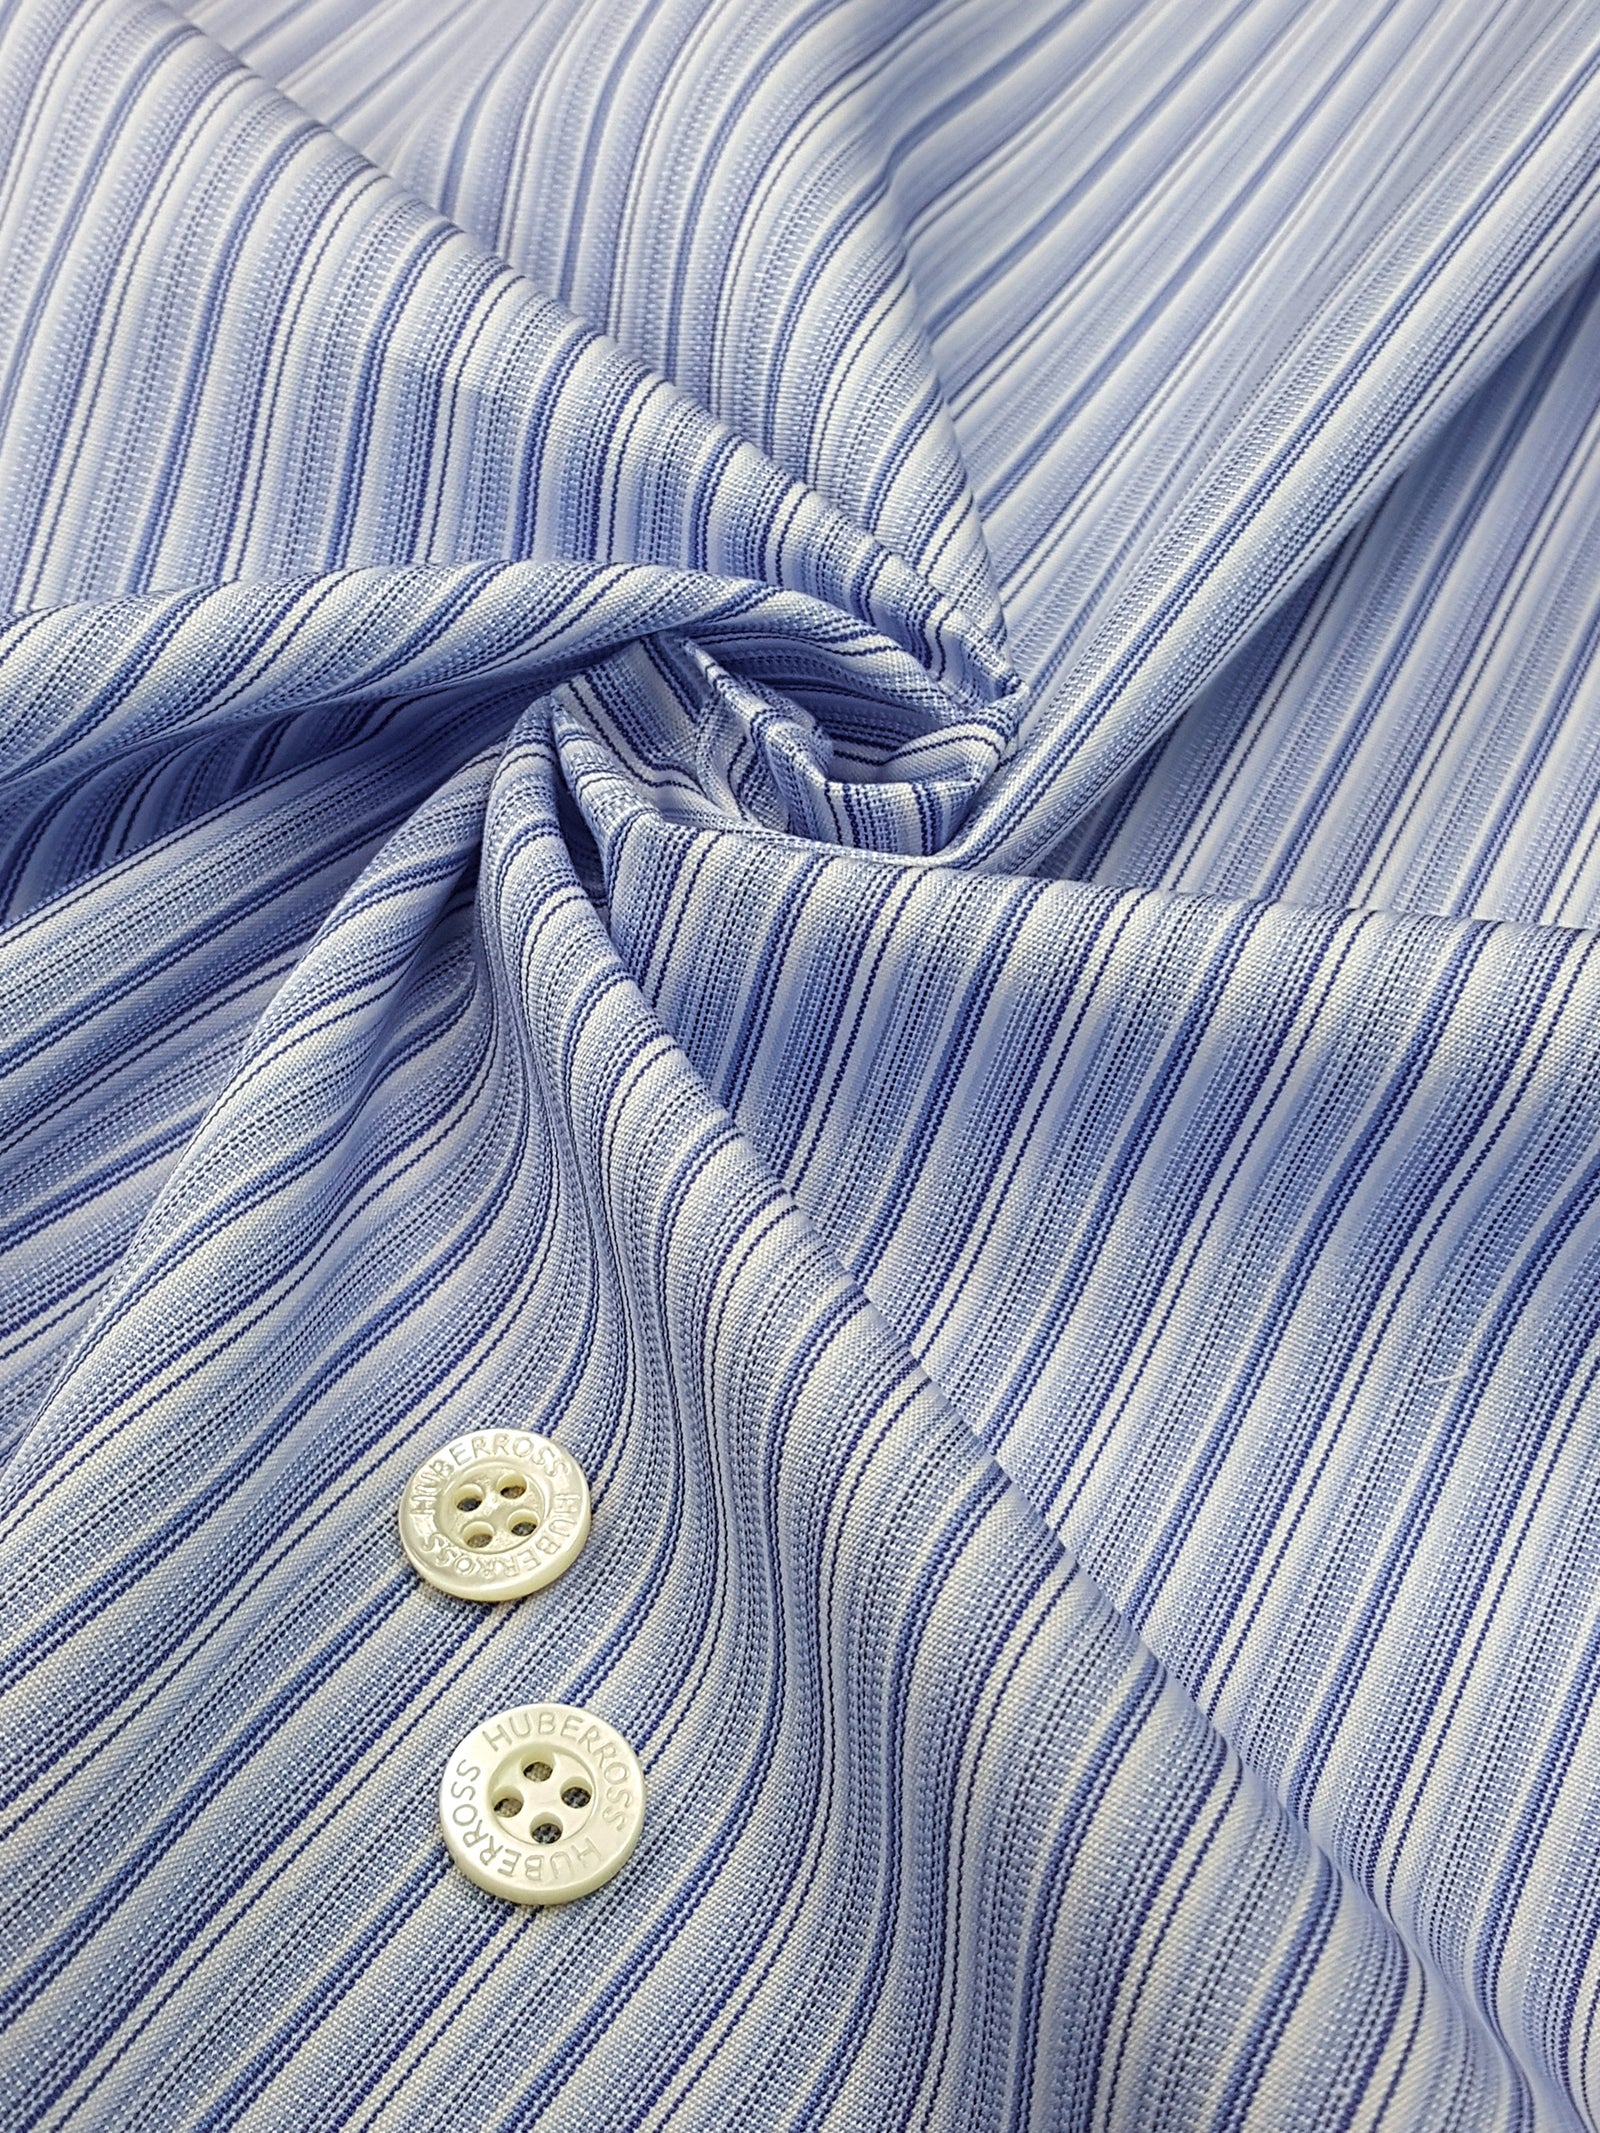 HUBERROSS 100's by 100's 2 plys Poplin Cotton 100% Egyptian Cotton Cloth Made in Italy  Width: 58'' / 150cm